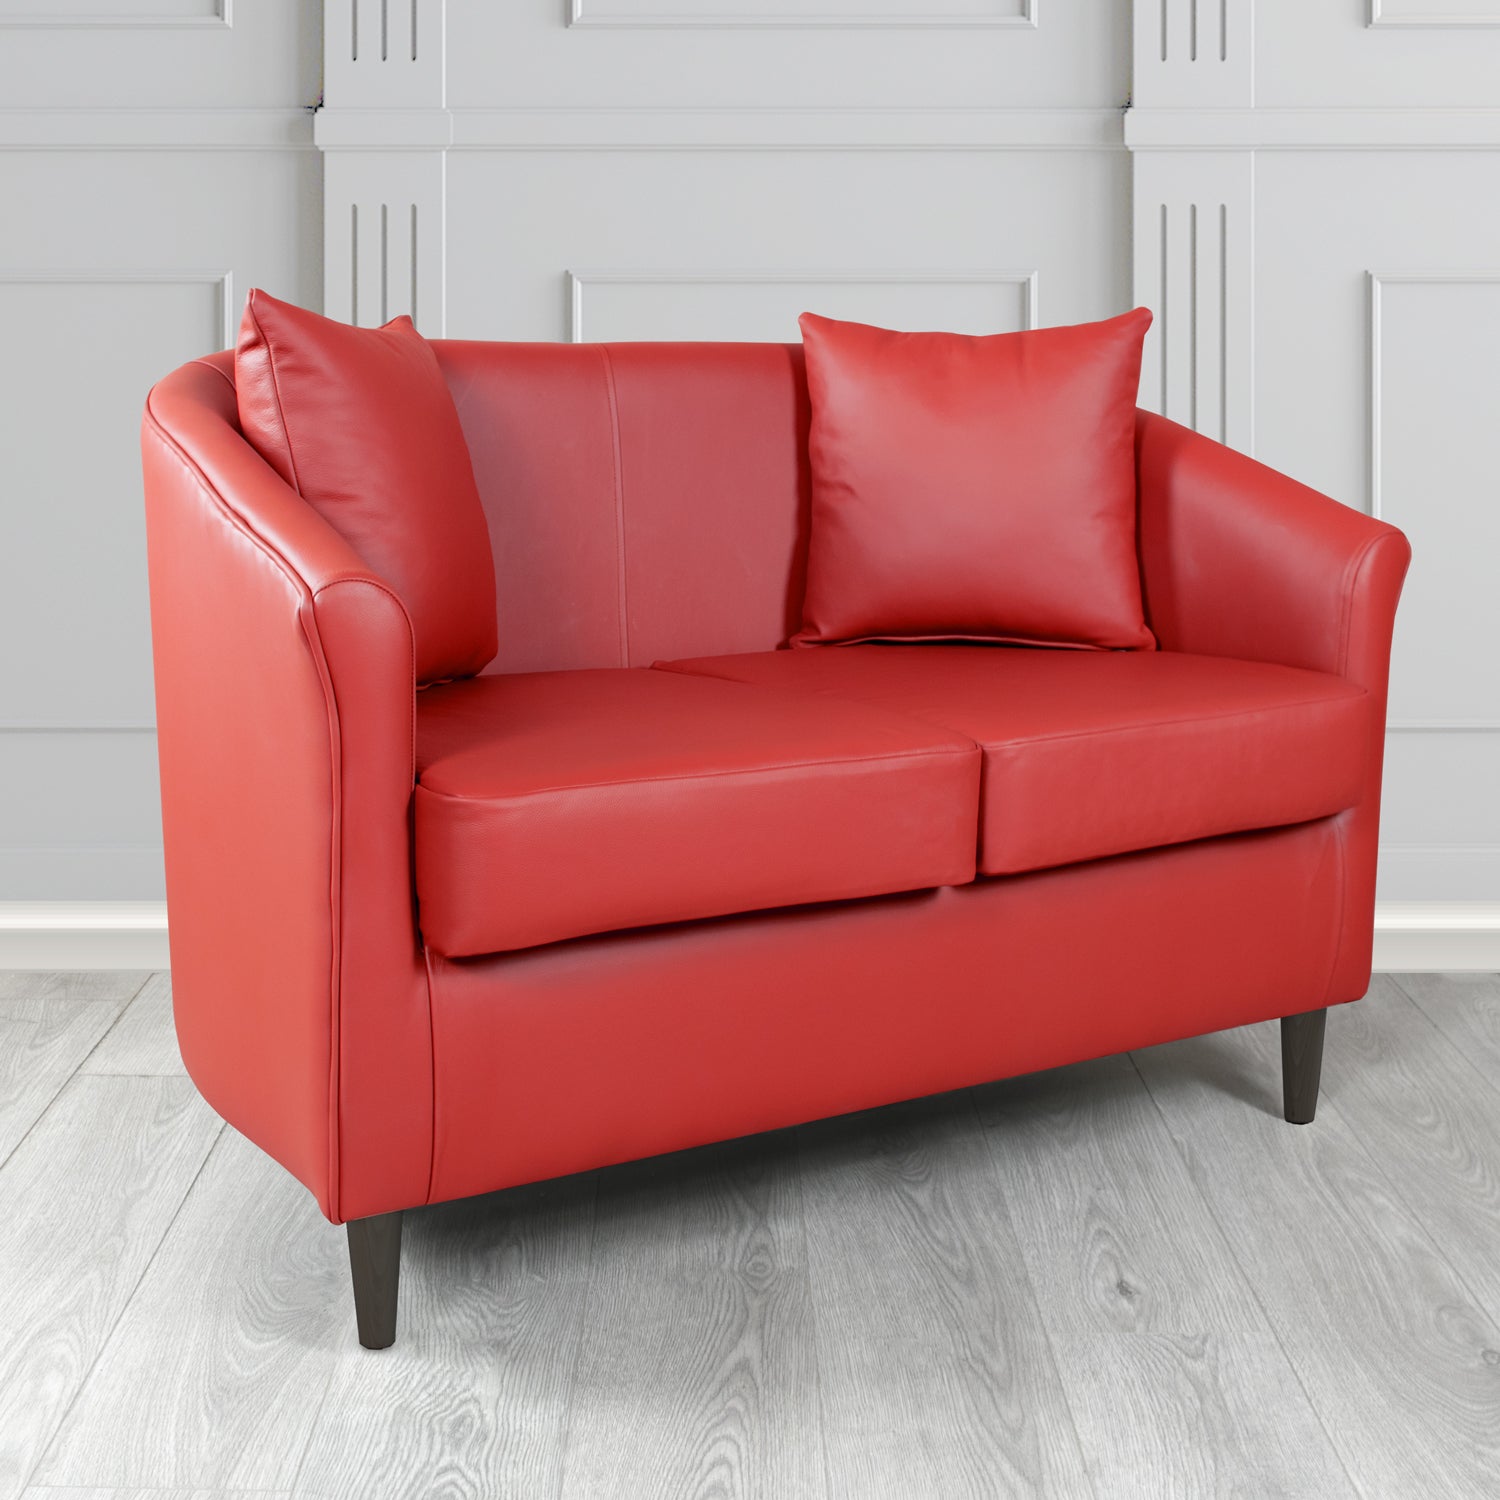 St Tropez Shelly Crimson Crib 5 Genuine Leather 2 Seater Tub Sofa with Scatter Cushions - The Tub Chair Shop